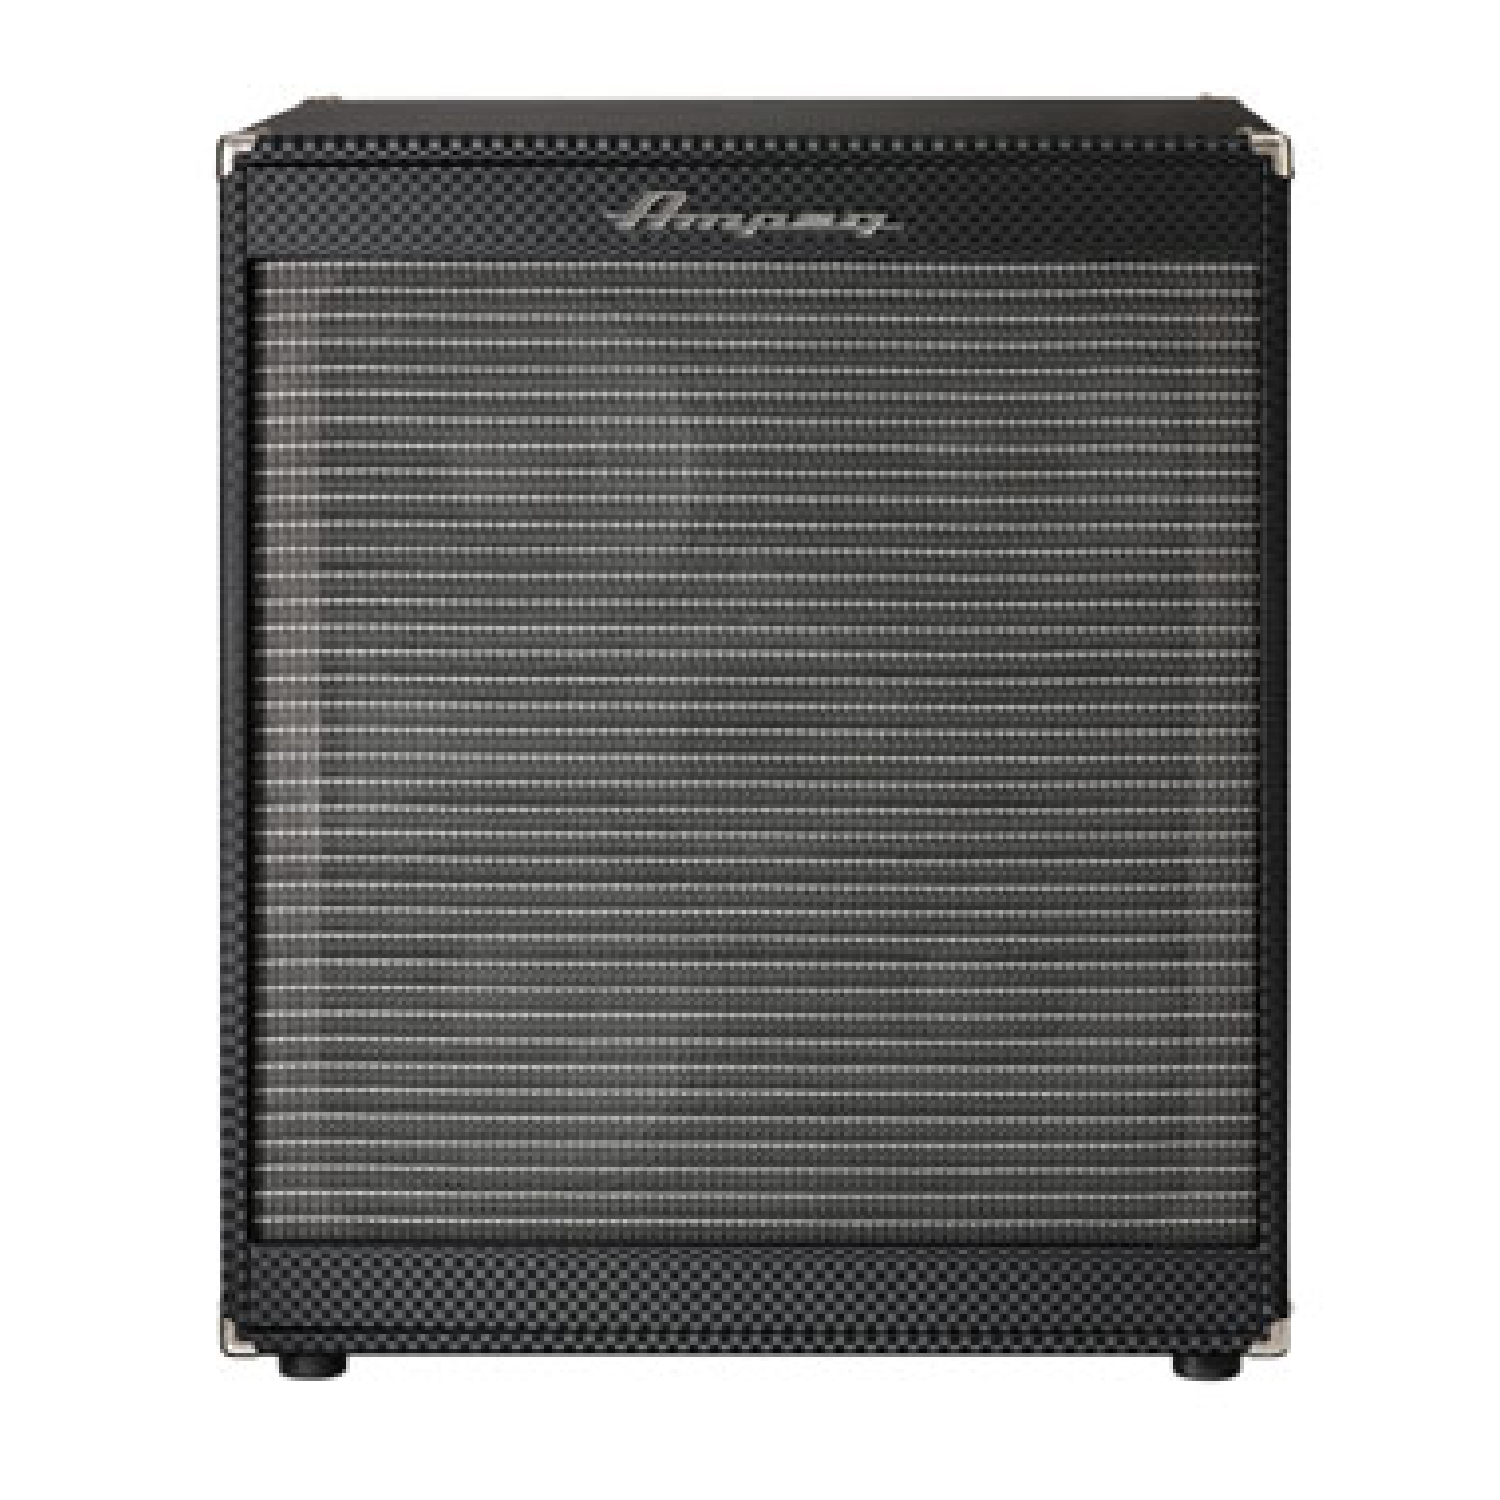 4 x 10 Inches Horn loaded, Extended Lows Cabinet 800 Watts   PF410HLF ampeg